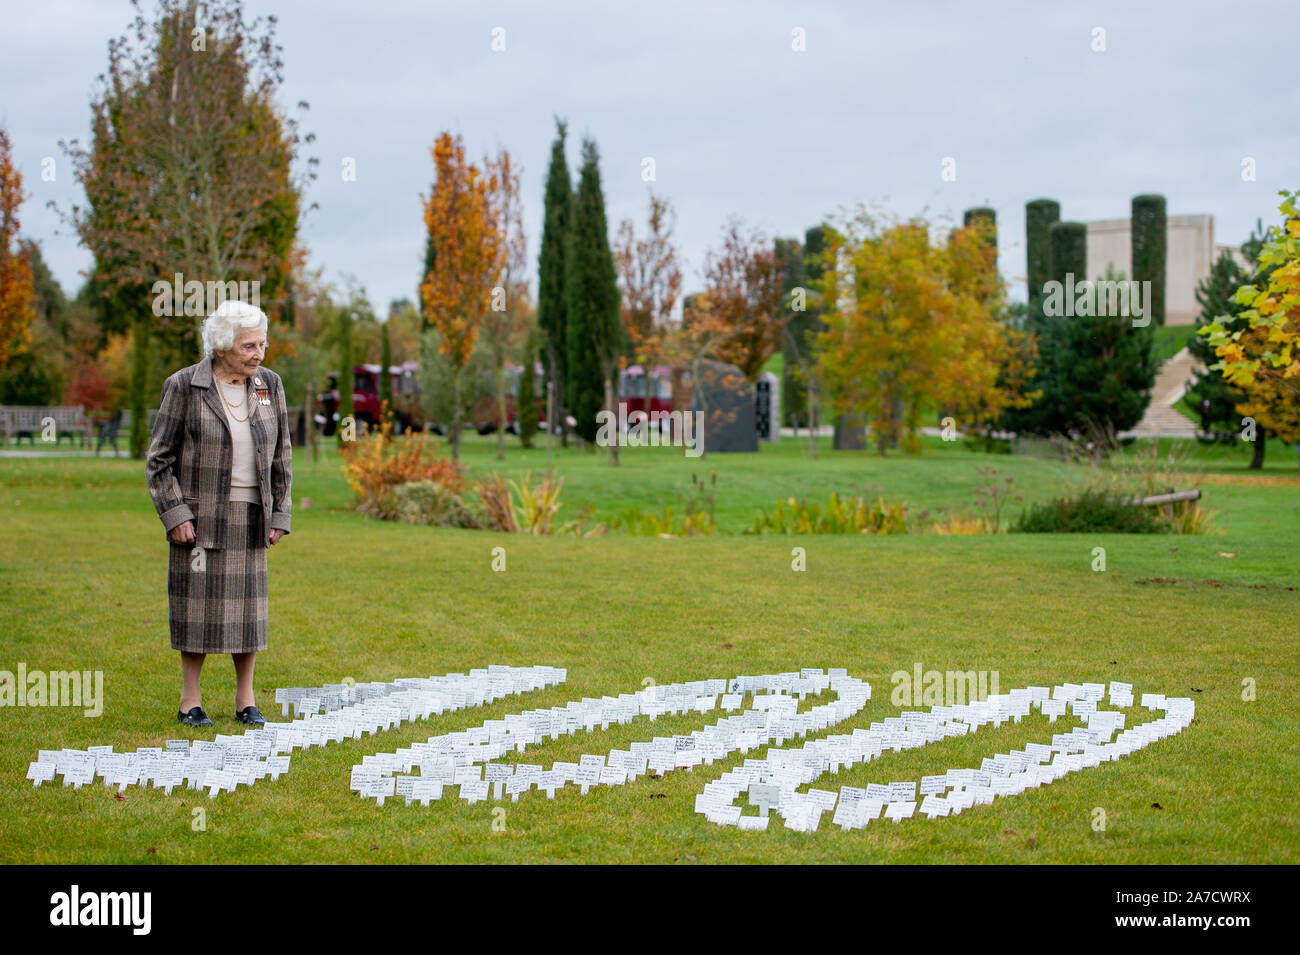 Bletchley Park veteran Betty Webb, 96, views a commemorative display of personal messages from staff at an event to mark 100 years of the Government Communications Headquarters (GCHQ), at the National Memorial Arboretum in Alrewas, Staffordshire. Stock Photo